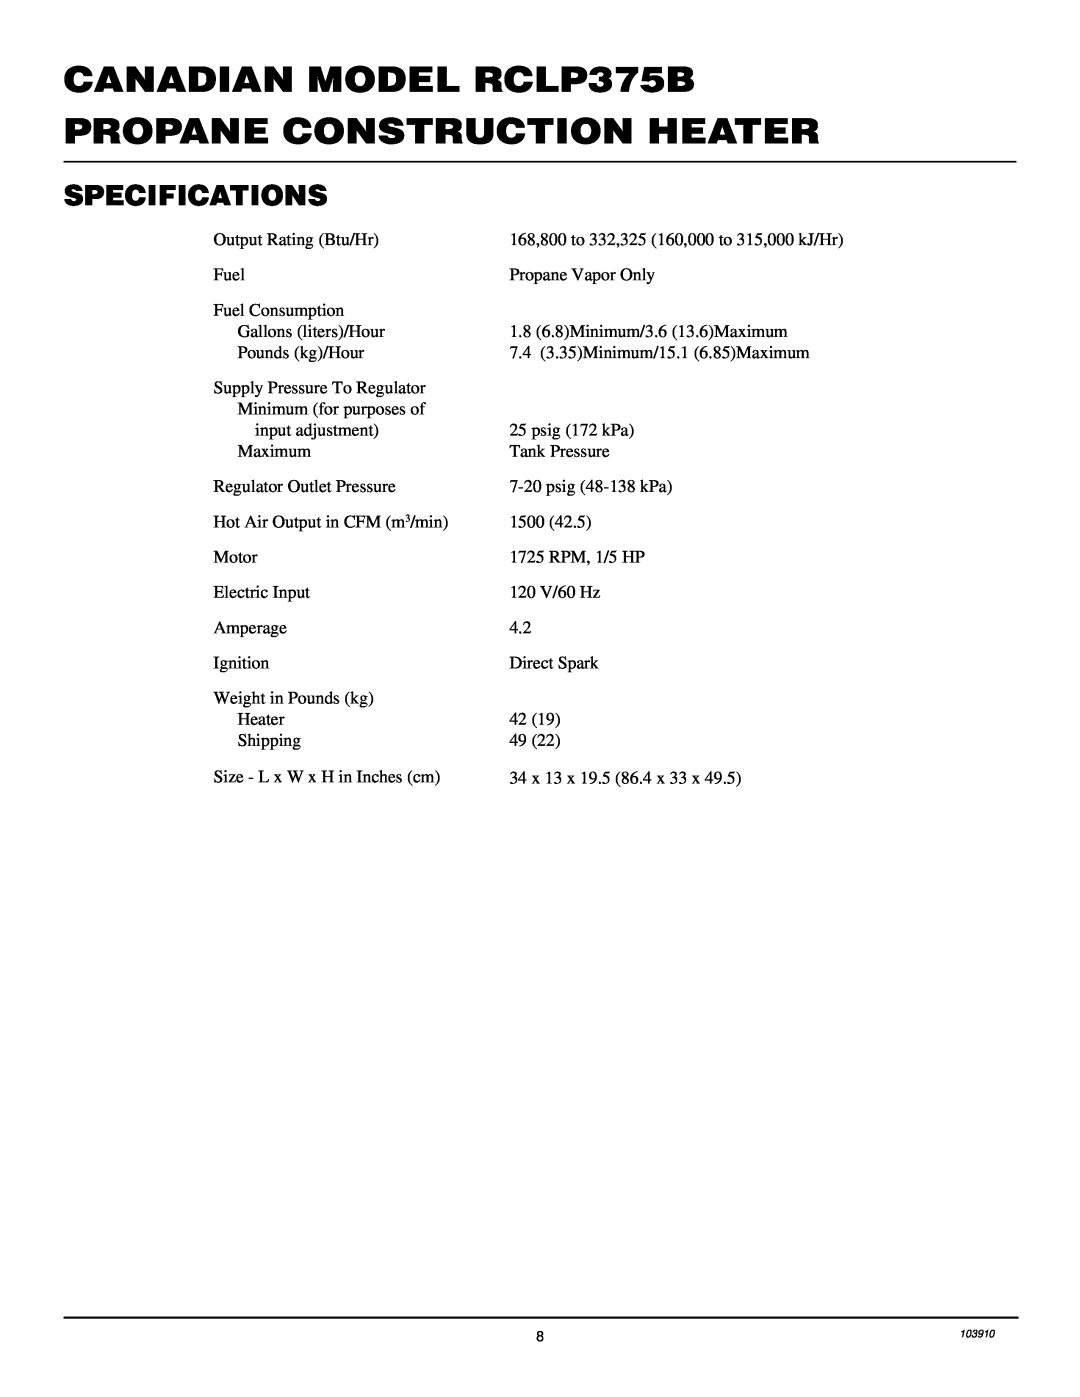 Desa owner manual Specifications, CANADIAN MODEL RCLP375B, Propane Construction Heater 